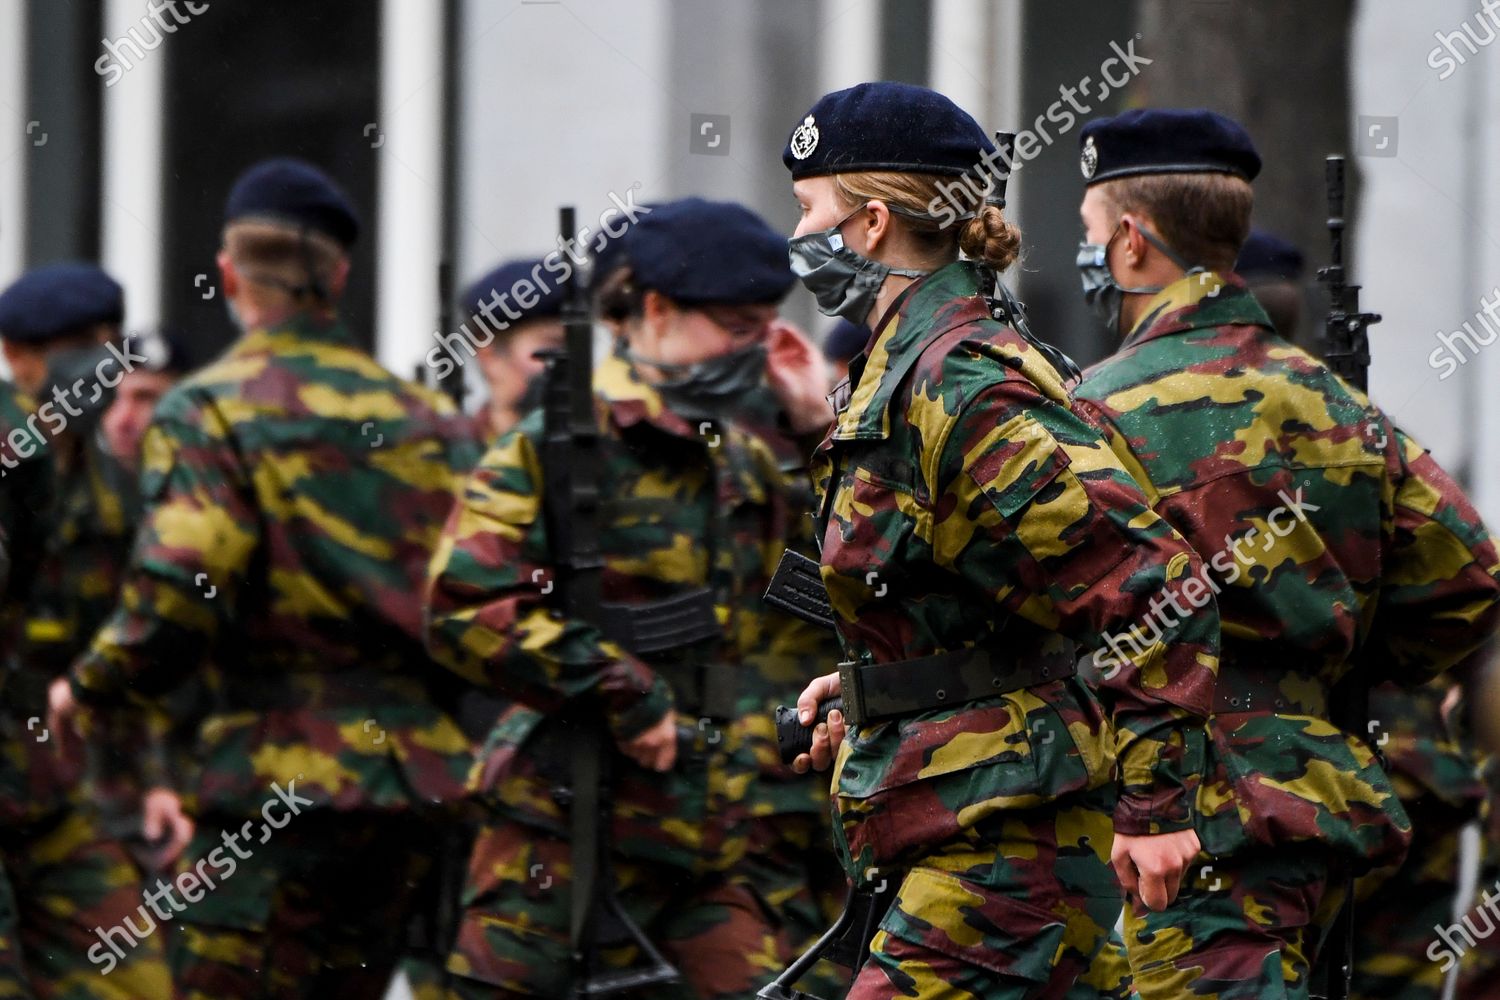 belgian-royals-attend-ceremony-for-the-presentation-of-the-blue-berets-royal-military-academy-erm-brussels-belgium-shutterstock-editorial-10790437c.jpg